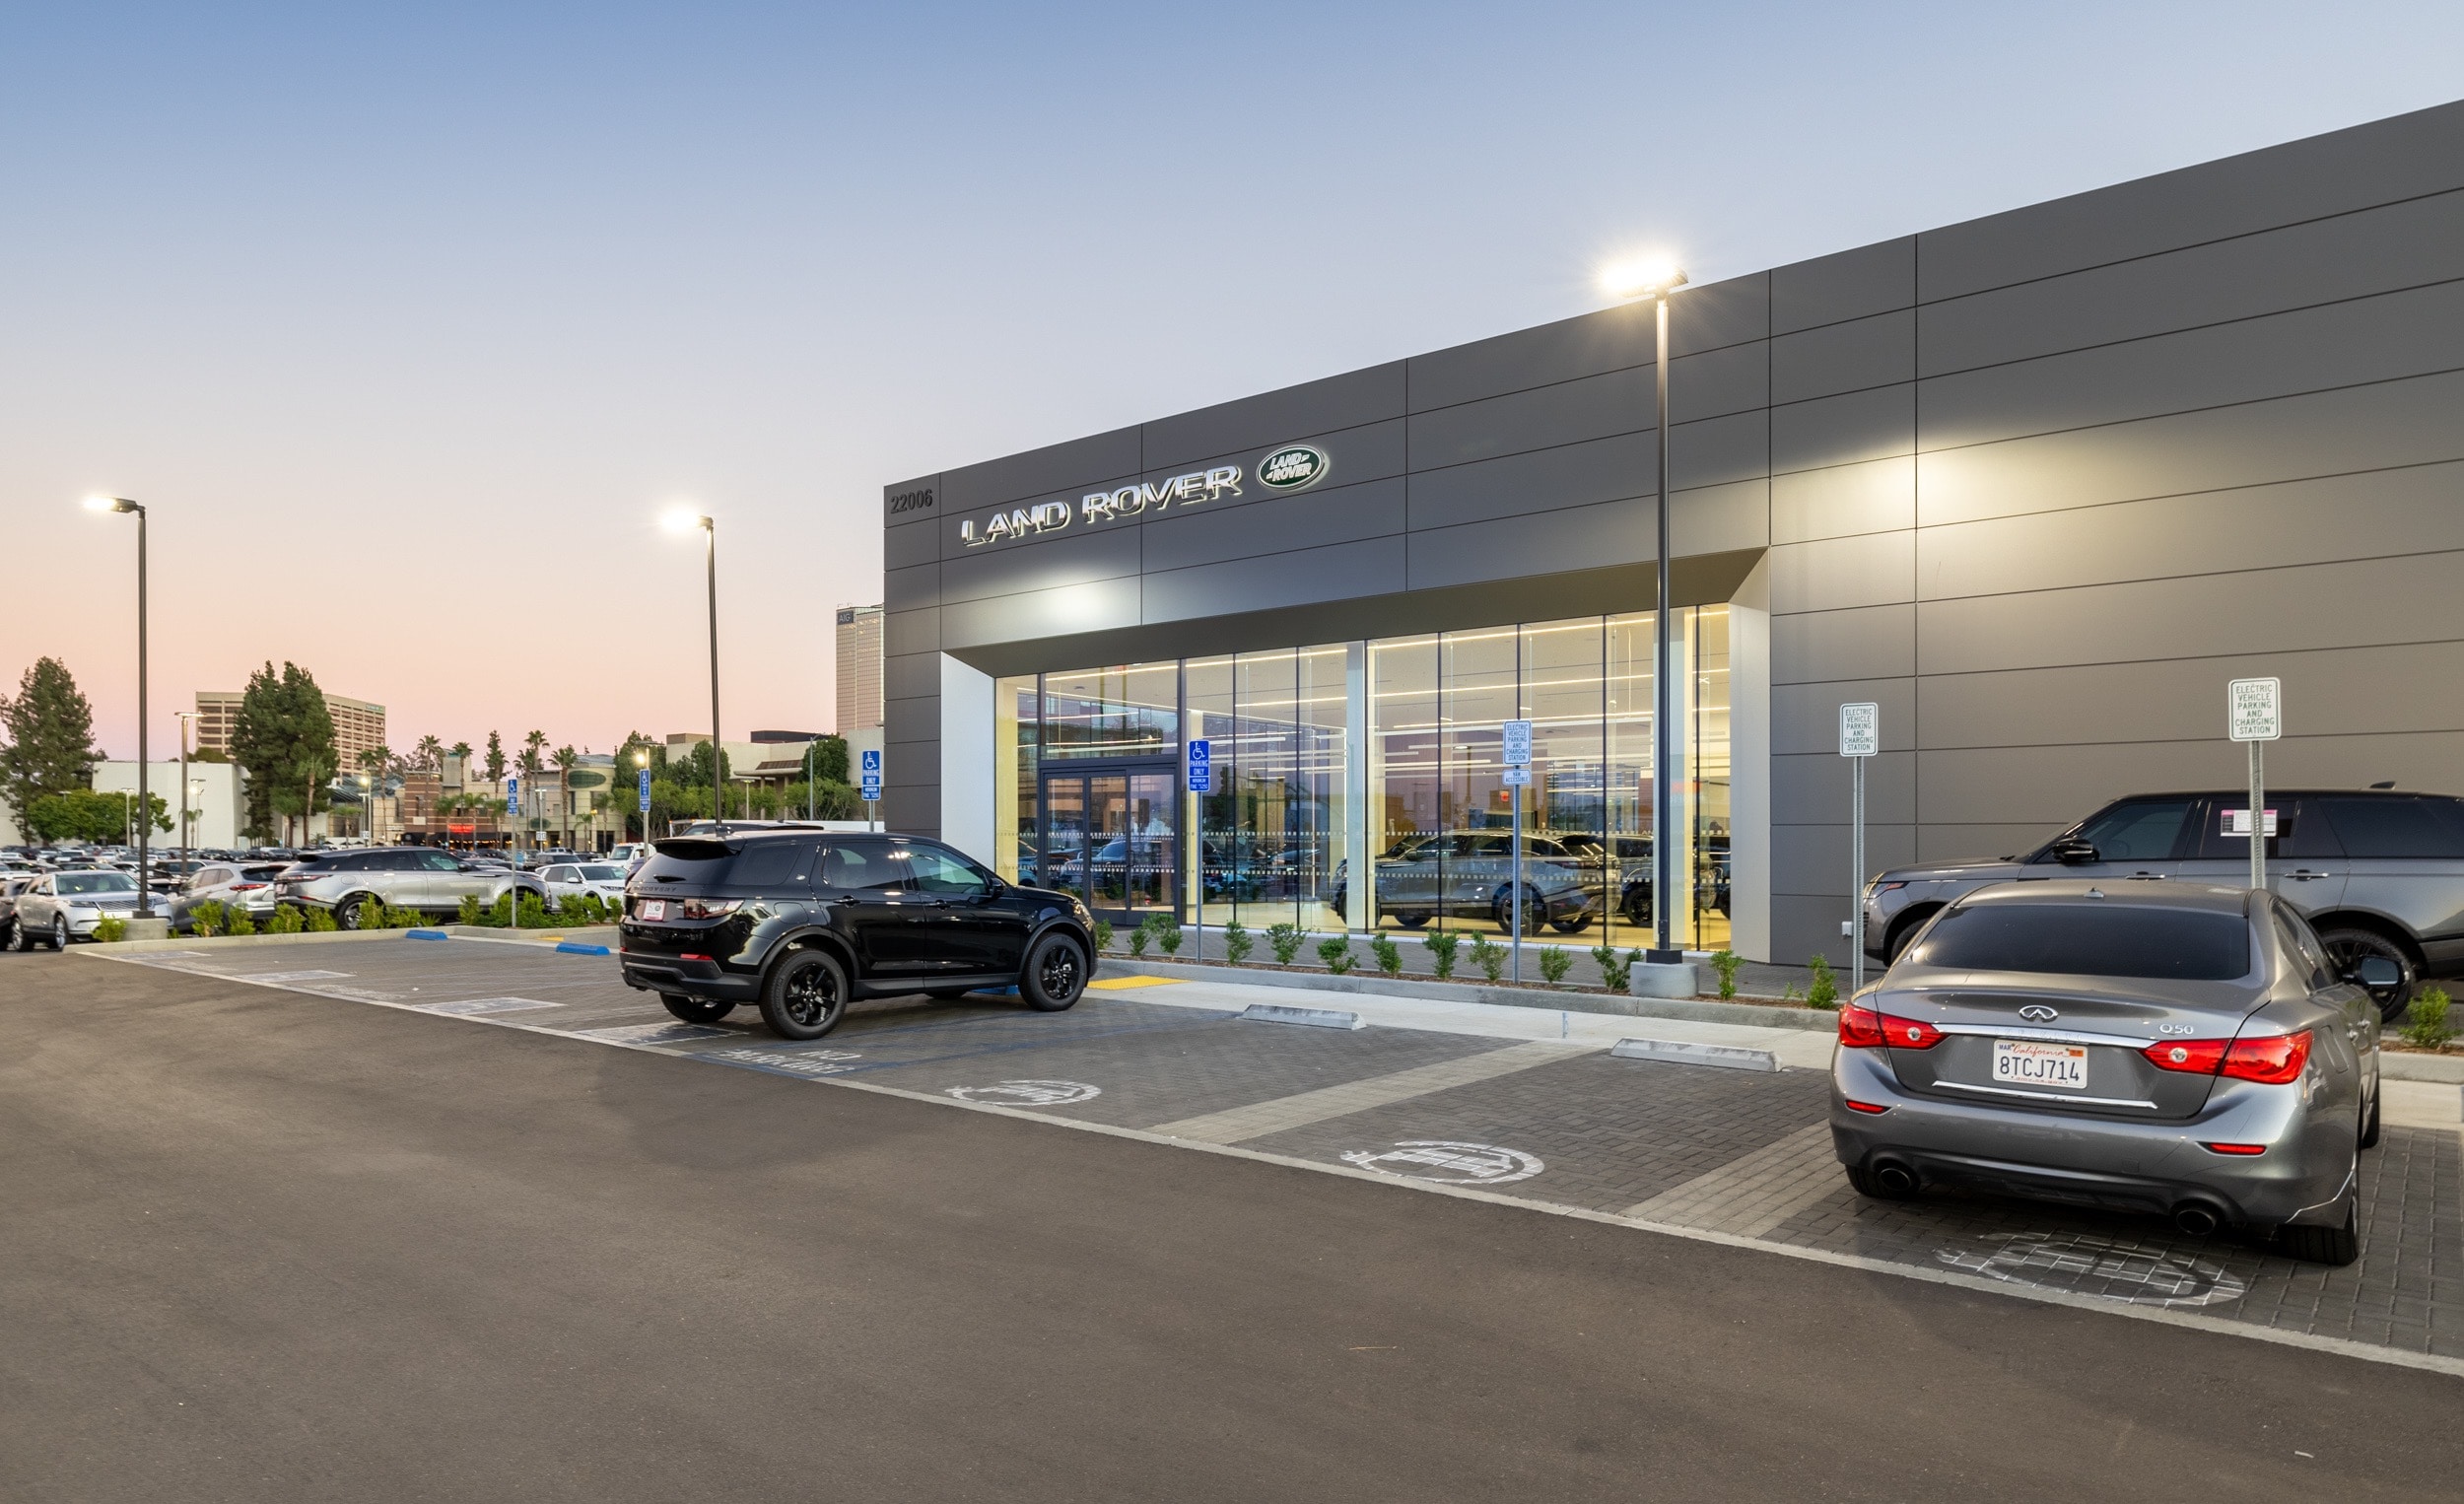 Front view of Land Rover Woodland Hills building with large windows in the front. The sky is clear, and it appears to be evening as parking lot lights are on.